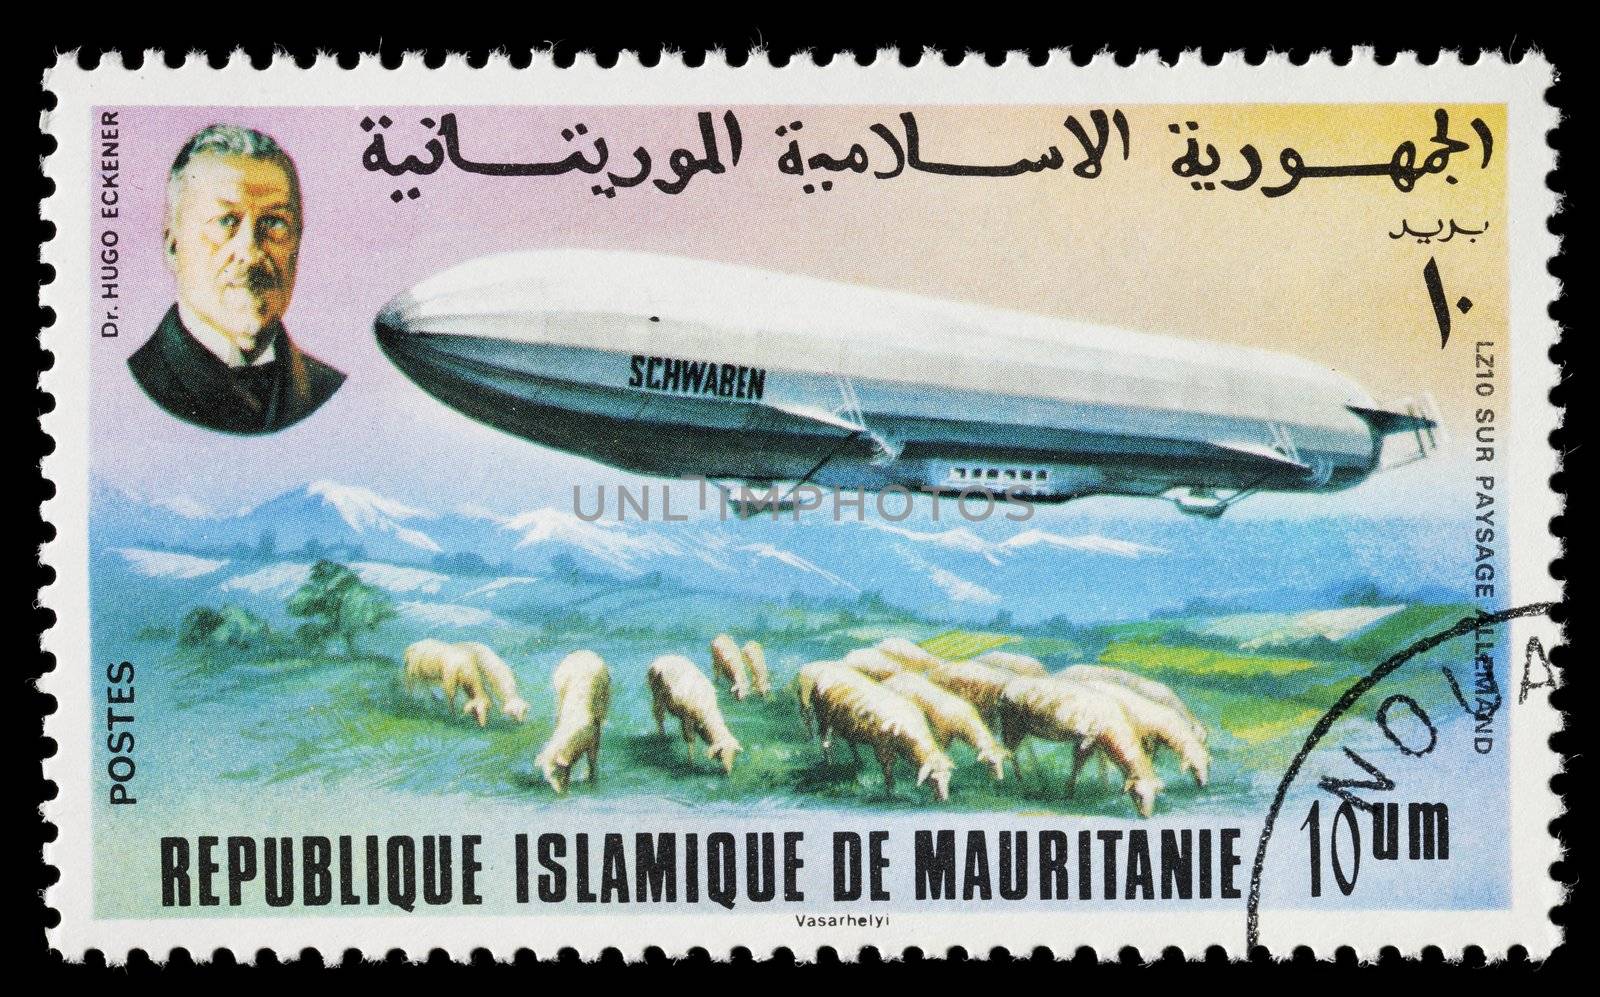 MAURITANIA - CIRCA 1976: Zeppelin stamp from Mauritania. LZ 10 Schwaben was a German rigid airship built by Luftschiffbau Zeppelin in 1911. It is regarded as the first commercially successful passenger-carrying aircraft. Circa 1976 in Mauritania